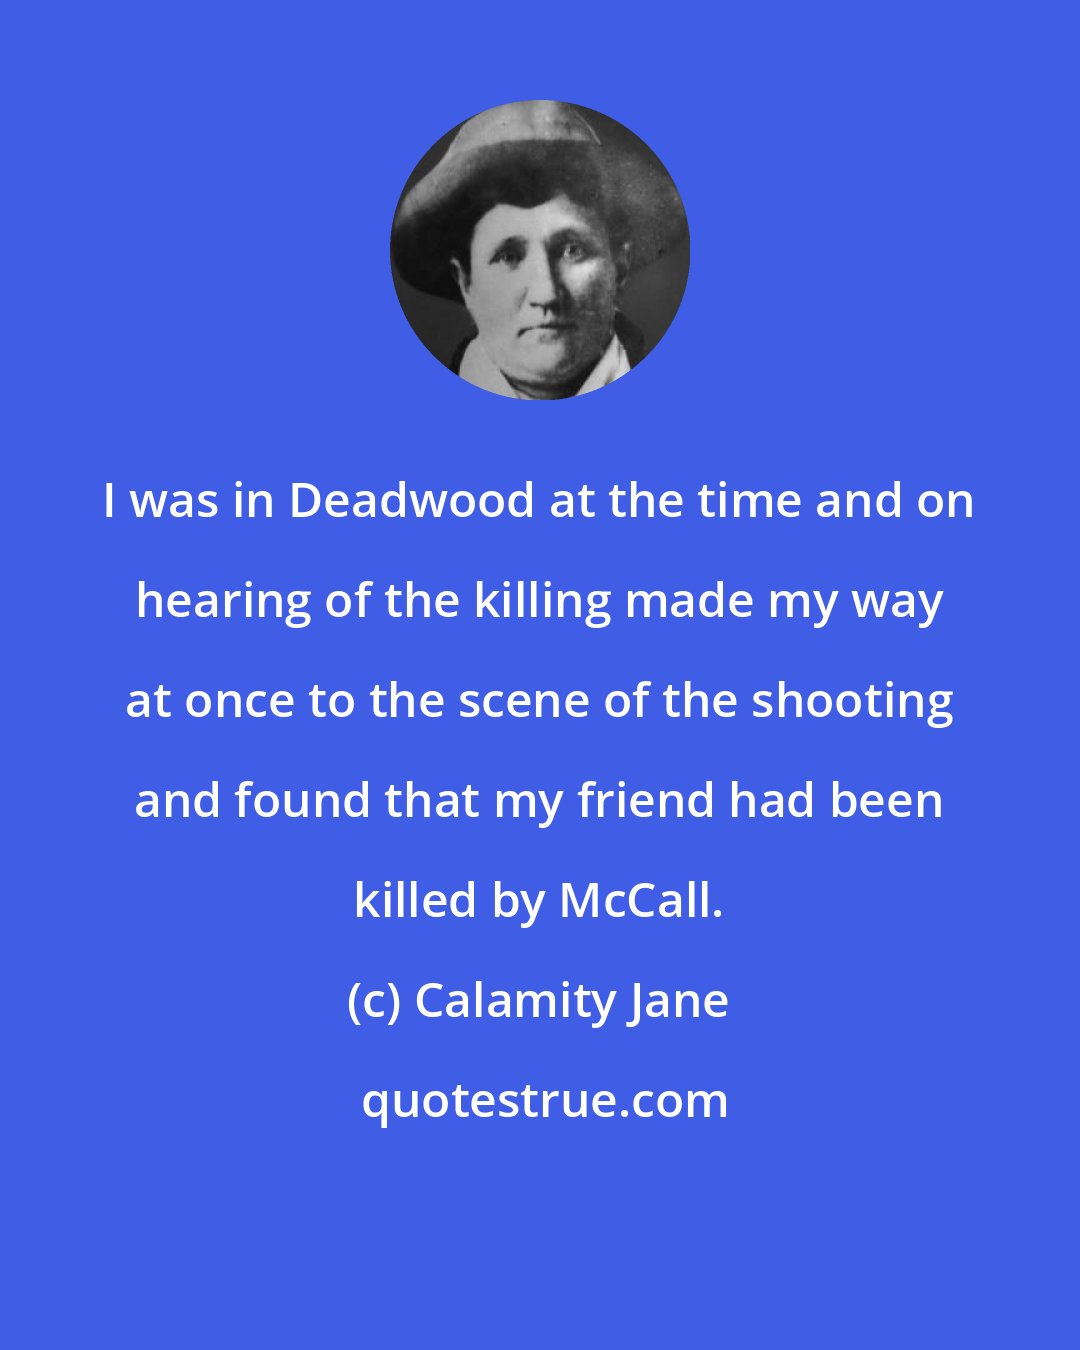 Calamity Jane: I was in Deadwood at the time and on hearing of the killing made my way at once to the scene of the shooting and found that my friend had been killed by McCall.